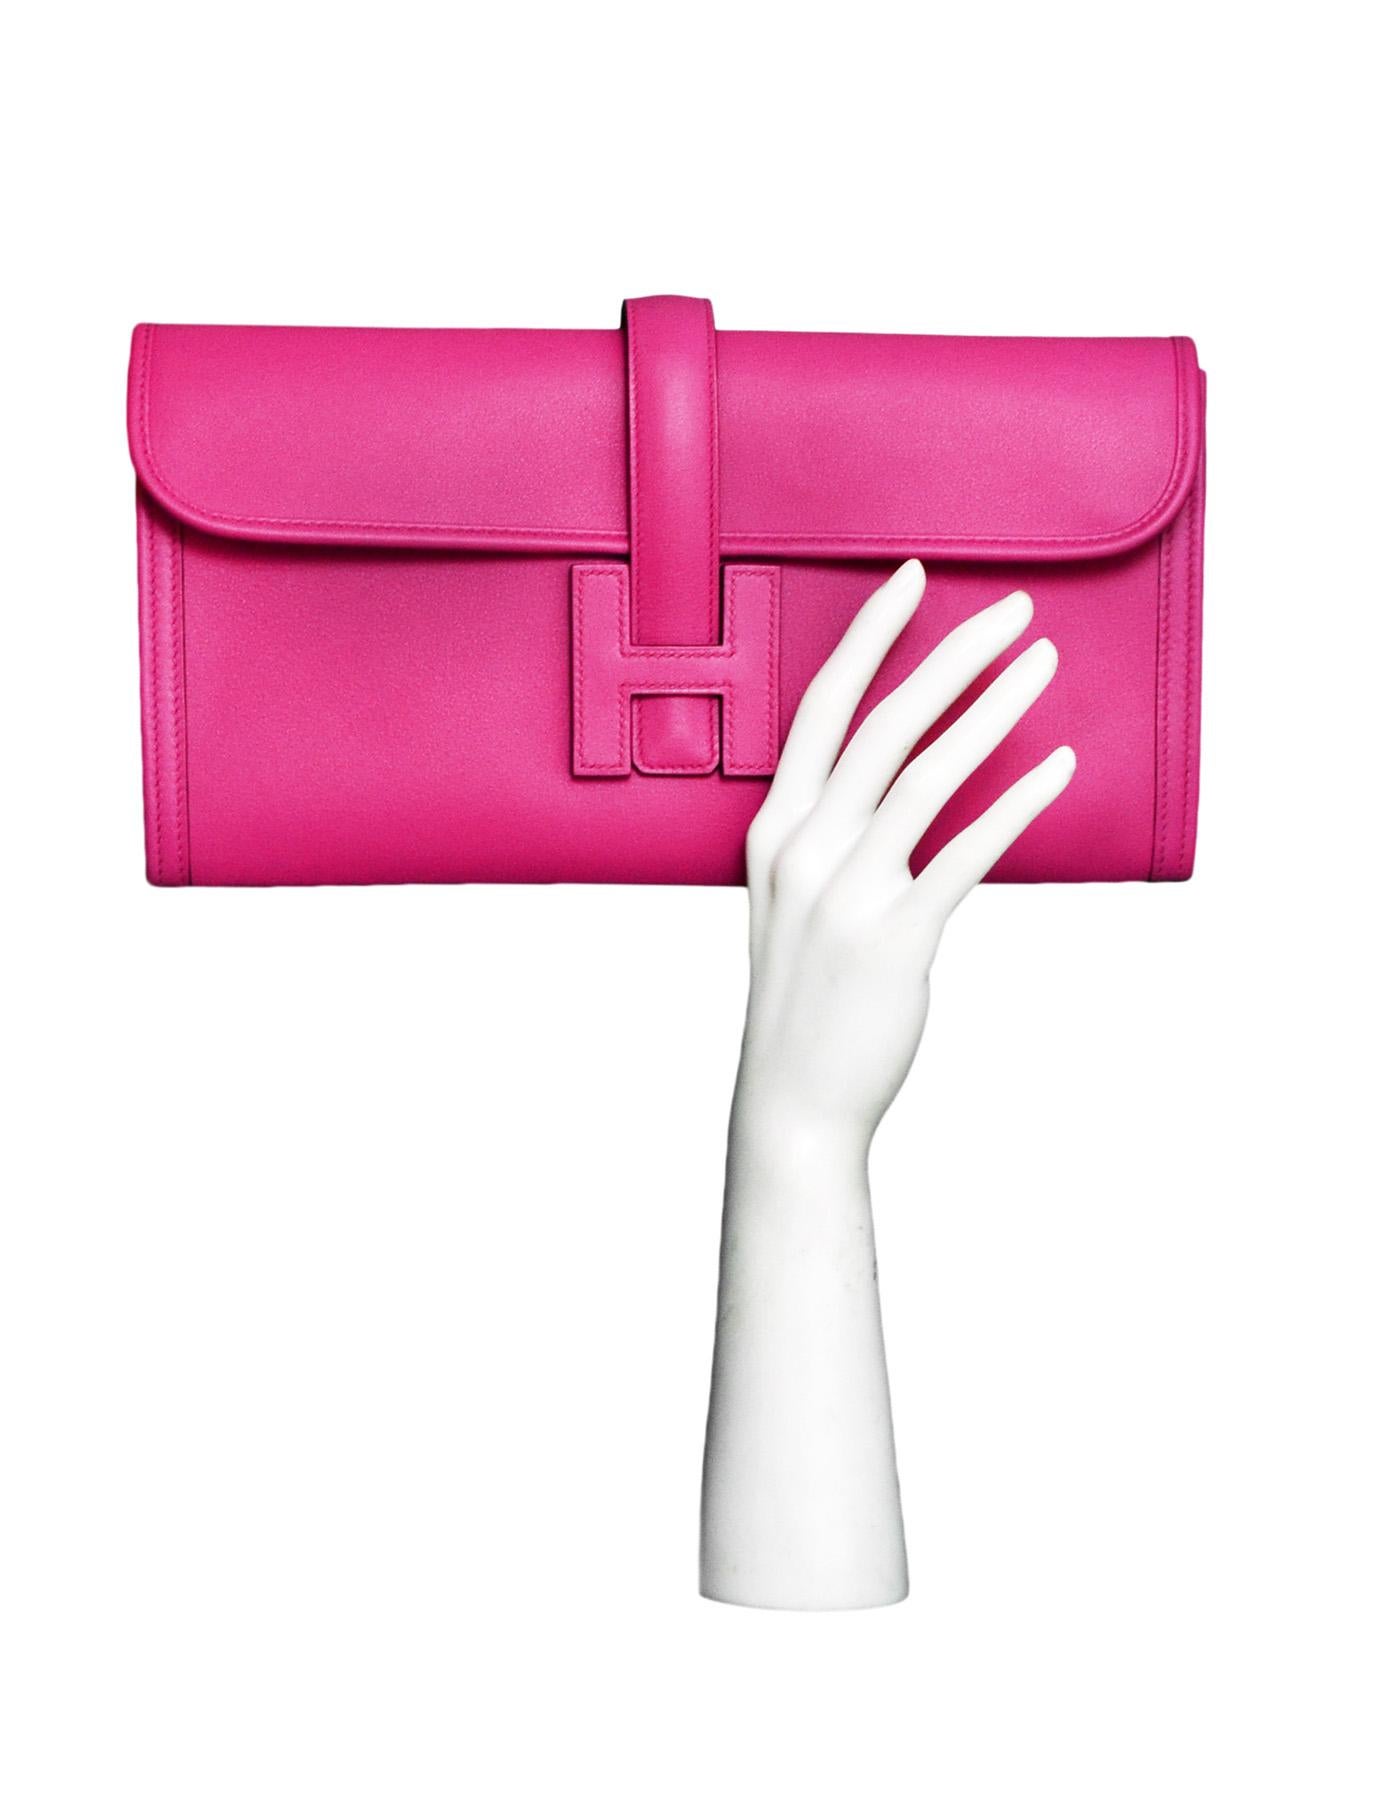 Hermes Magnolia Swift Leather Jige Elan 29 Clutch Bag

Made In: France
Year of Production: 2018
Color: Magnolia pink
Hardware: None
Materials: Swift leather
Lining: Leather
Closure/opening: Flap top with strap that goes through H
Exterior Pockets: